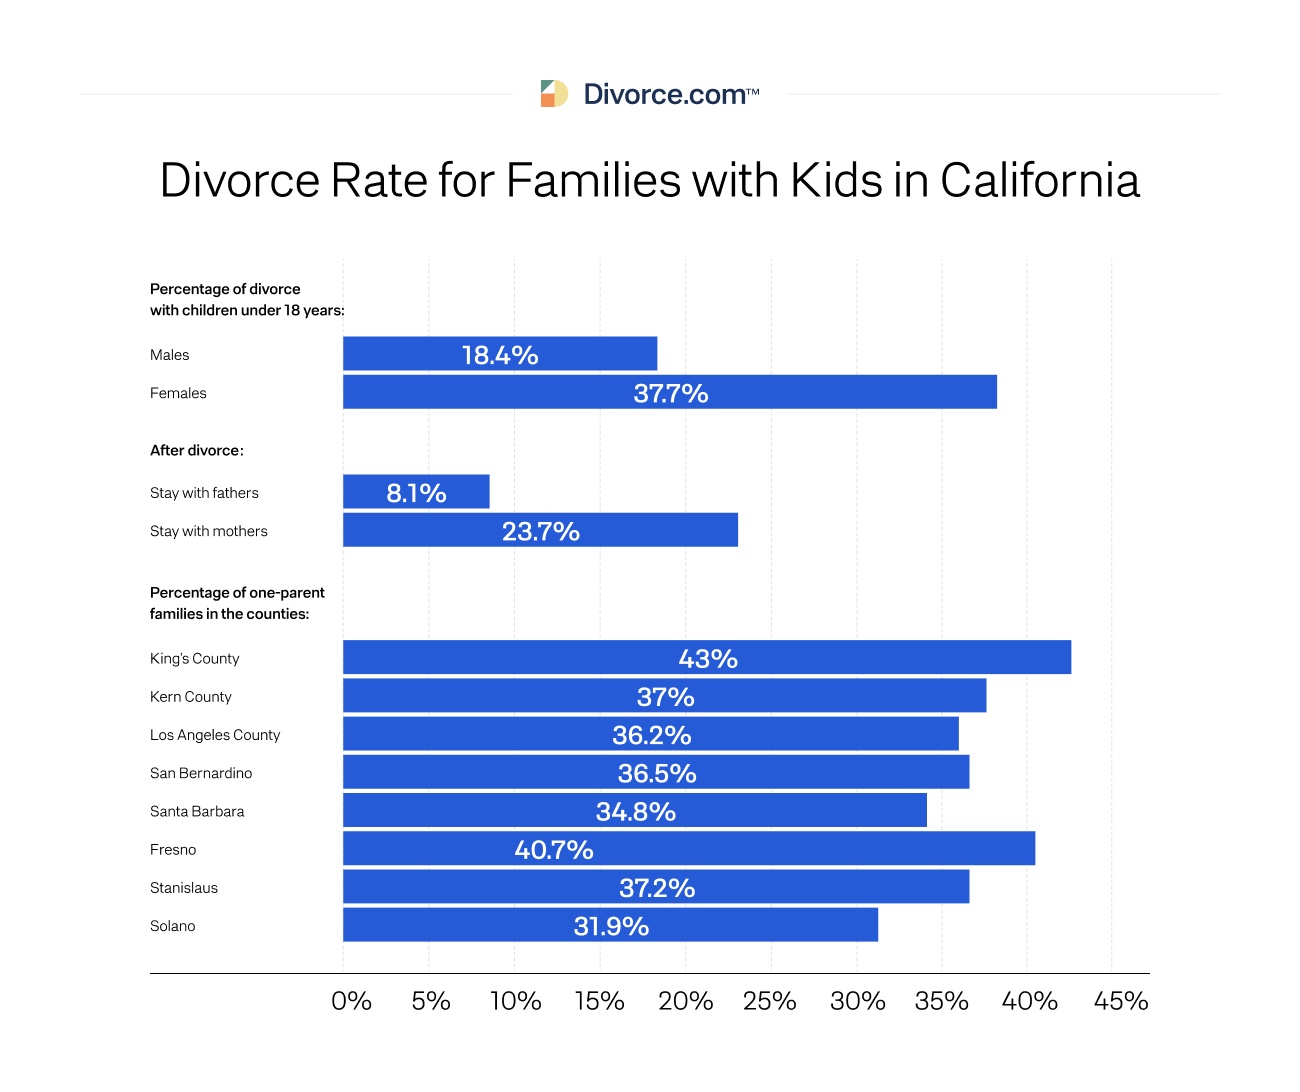 Divorce Rate for Families with Kids in California